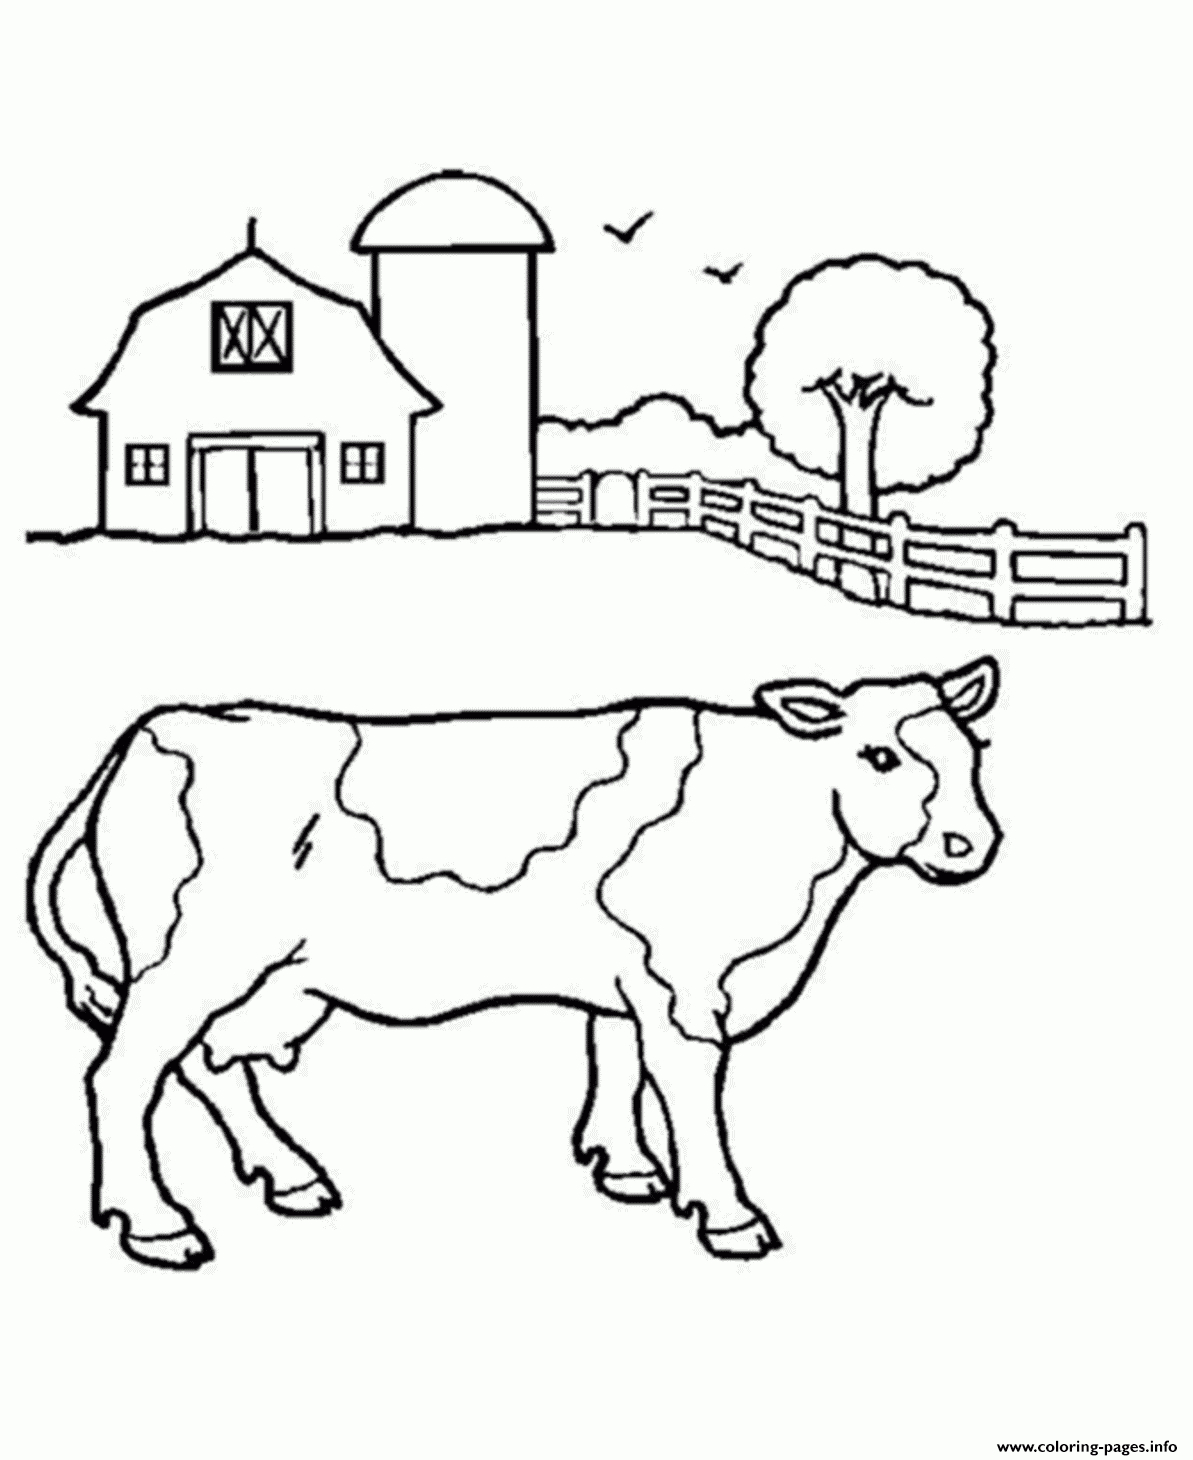 Animal Farm Cow S1363 Coloring Pages Printable - Coloring Pages Of Cows Free Printable